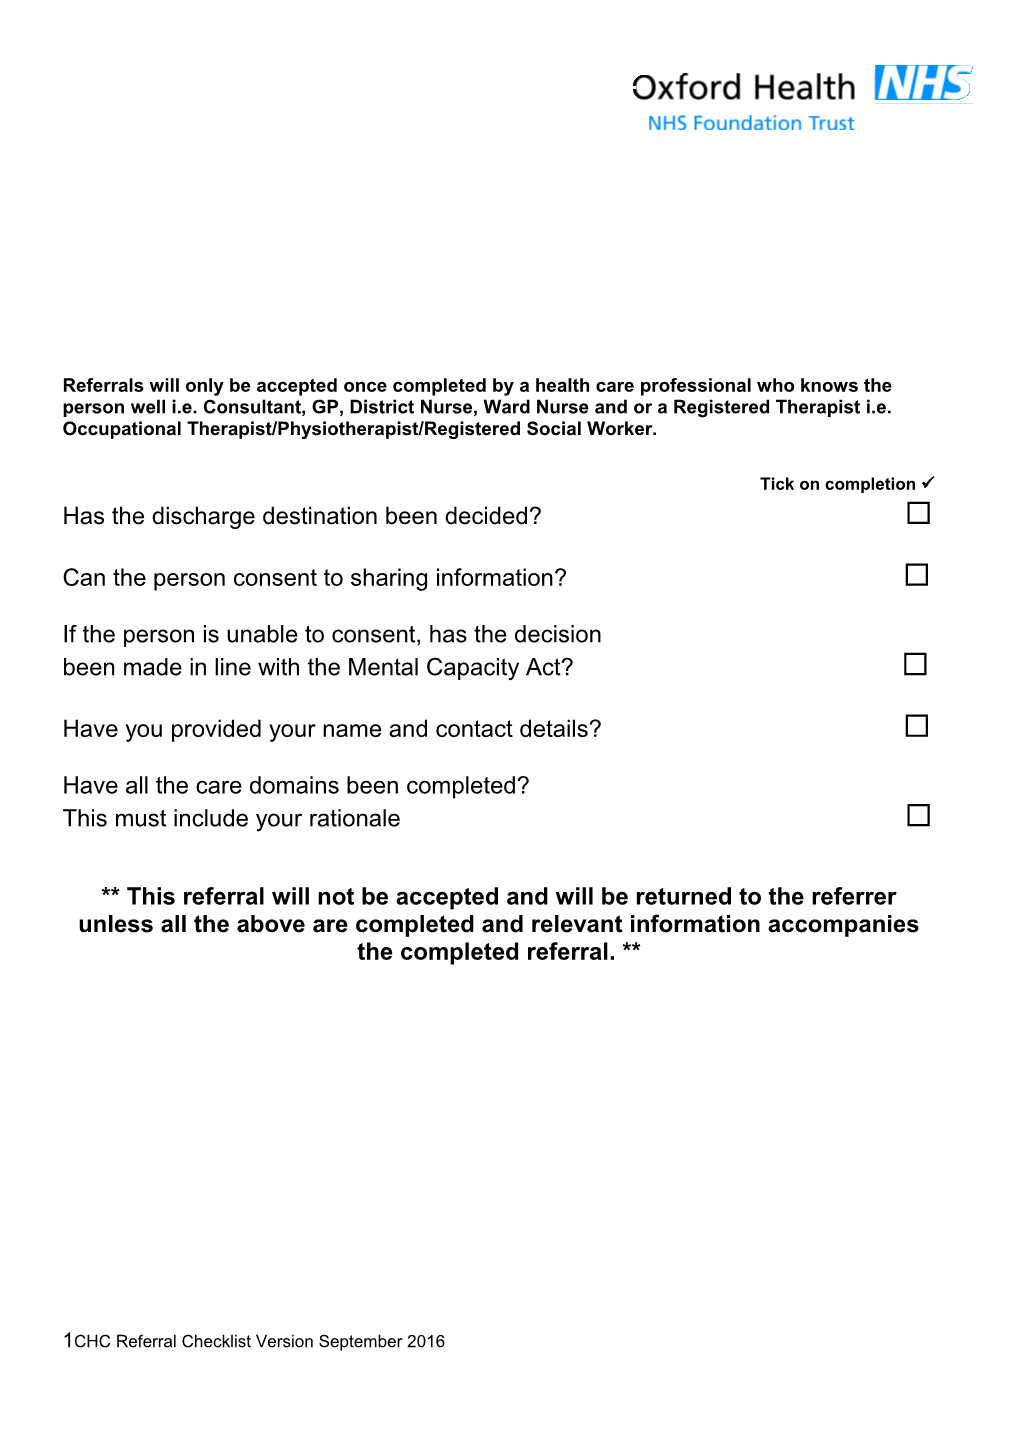 Referral Process for Continuing Health Care Needs Assessment